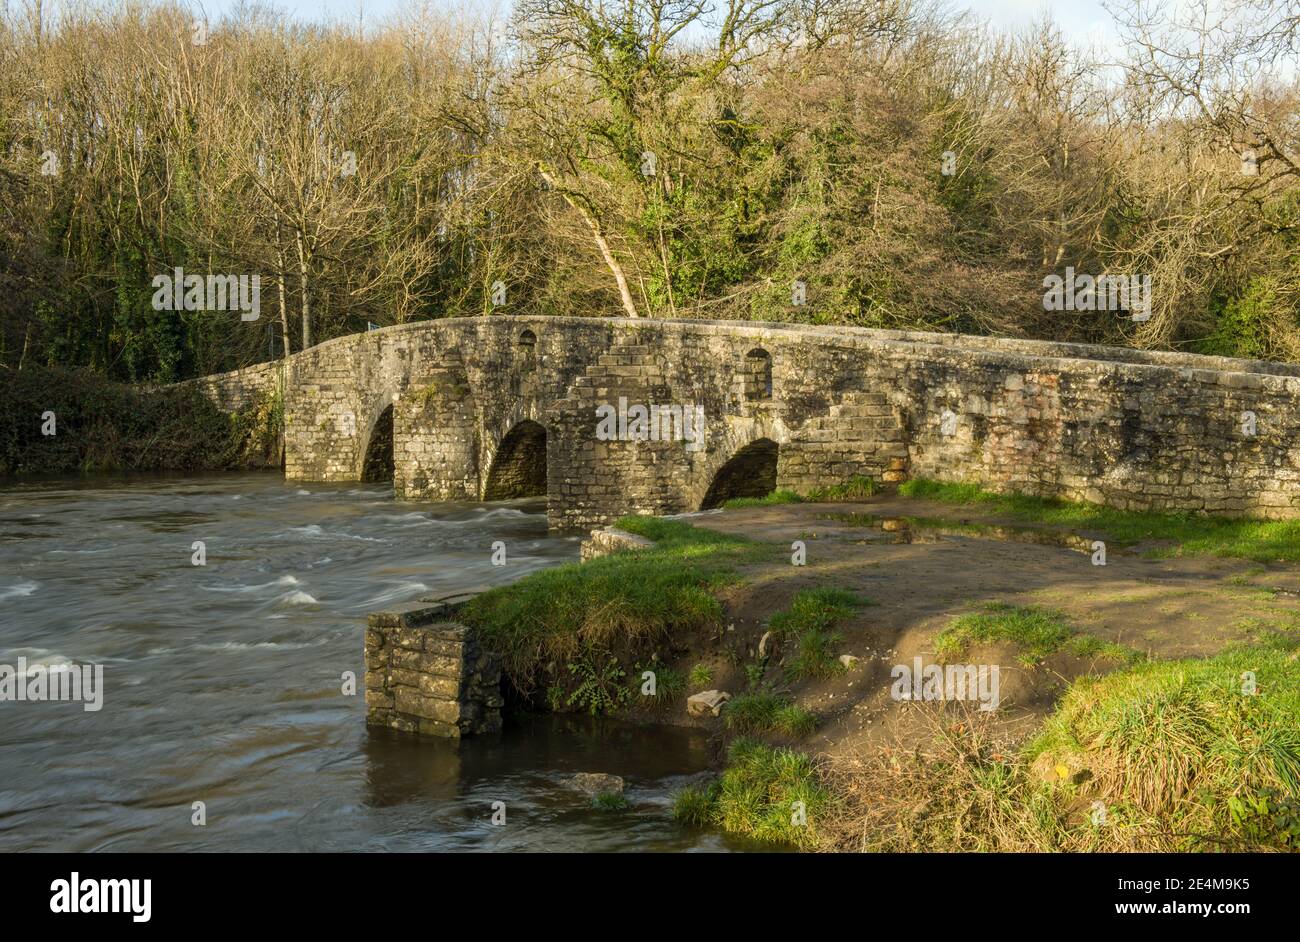 The old stone sheep dipping bridge over the River Ogmore near Marthyr Mawr in Bridgend County Borough Council.The bridge holes were to push the sheep Stock Photo